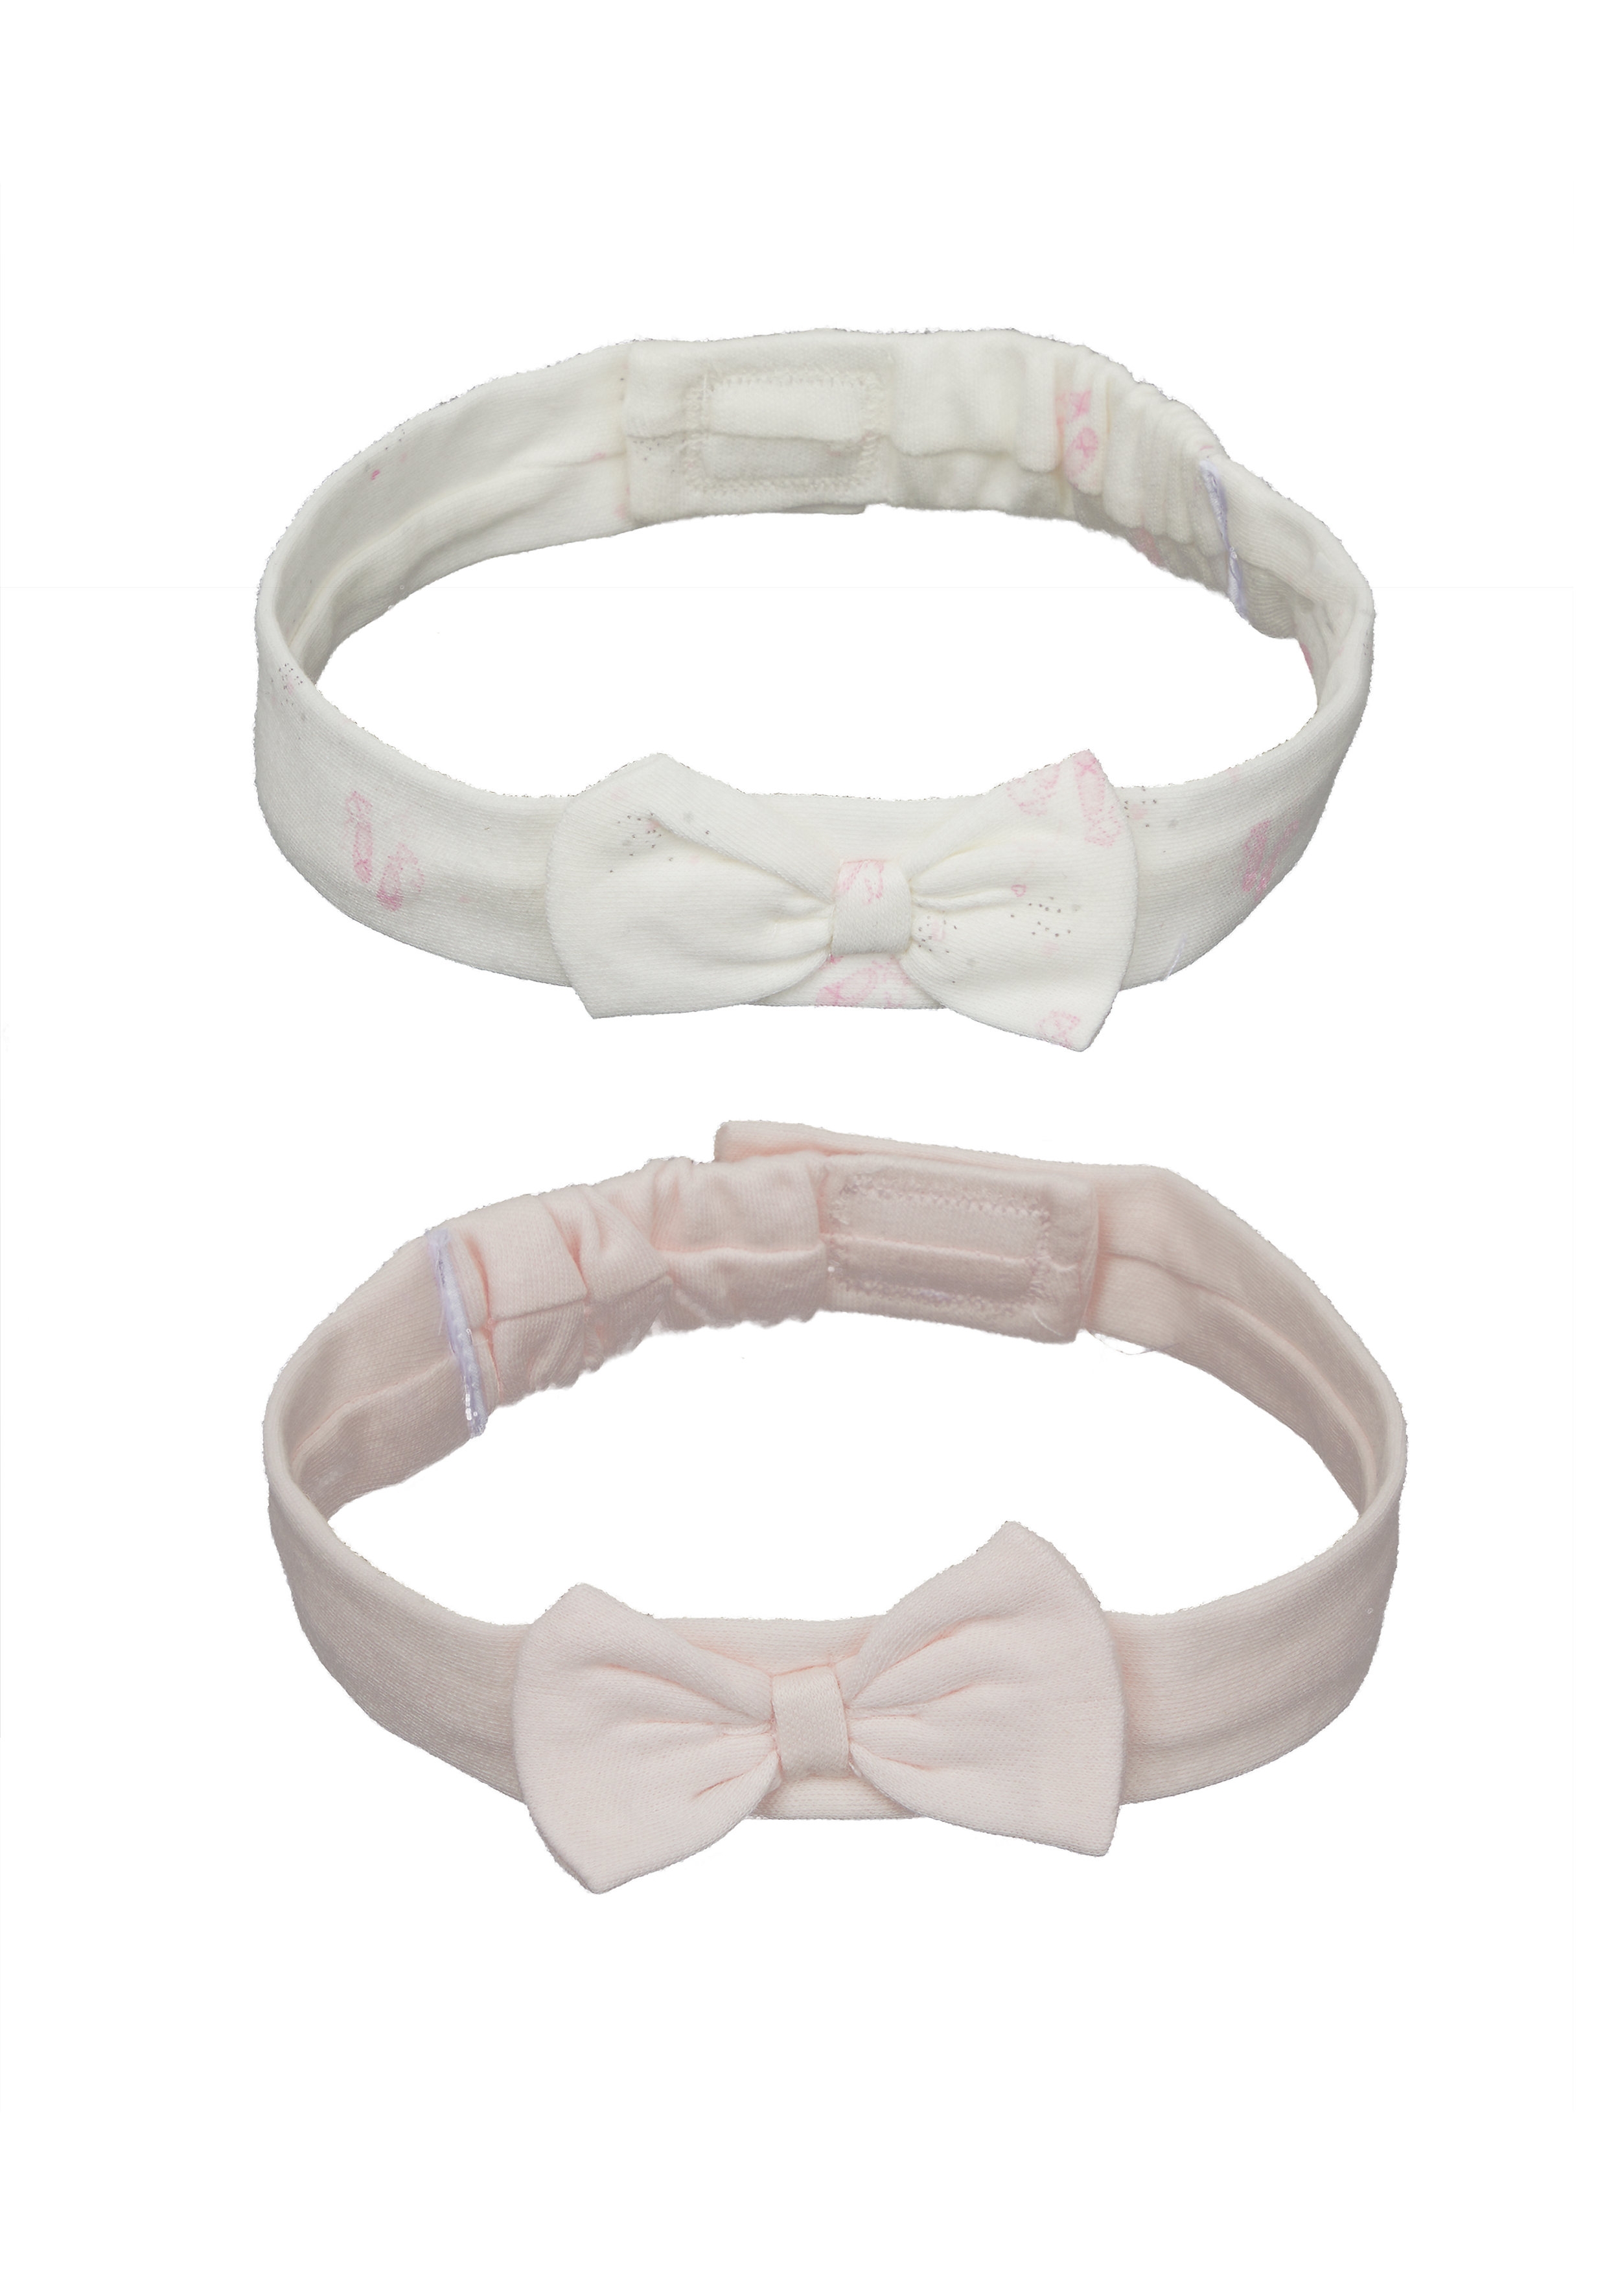 Mothercare | Girls Bow Headbands - 2 Pack - Pink